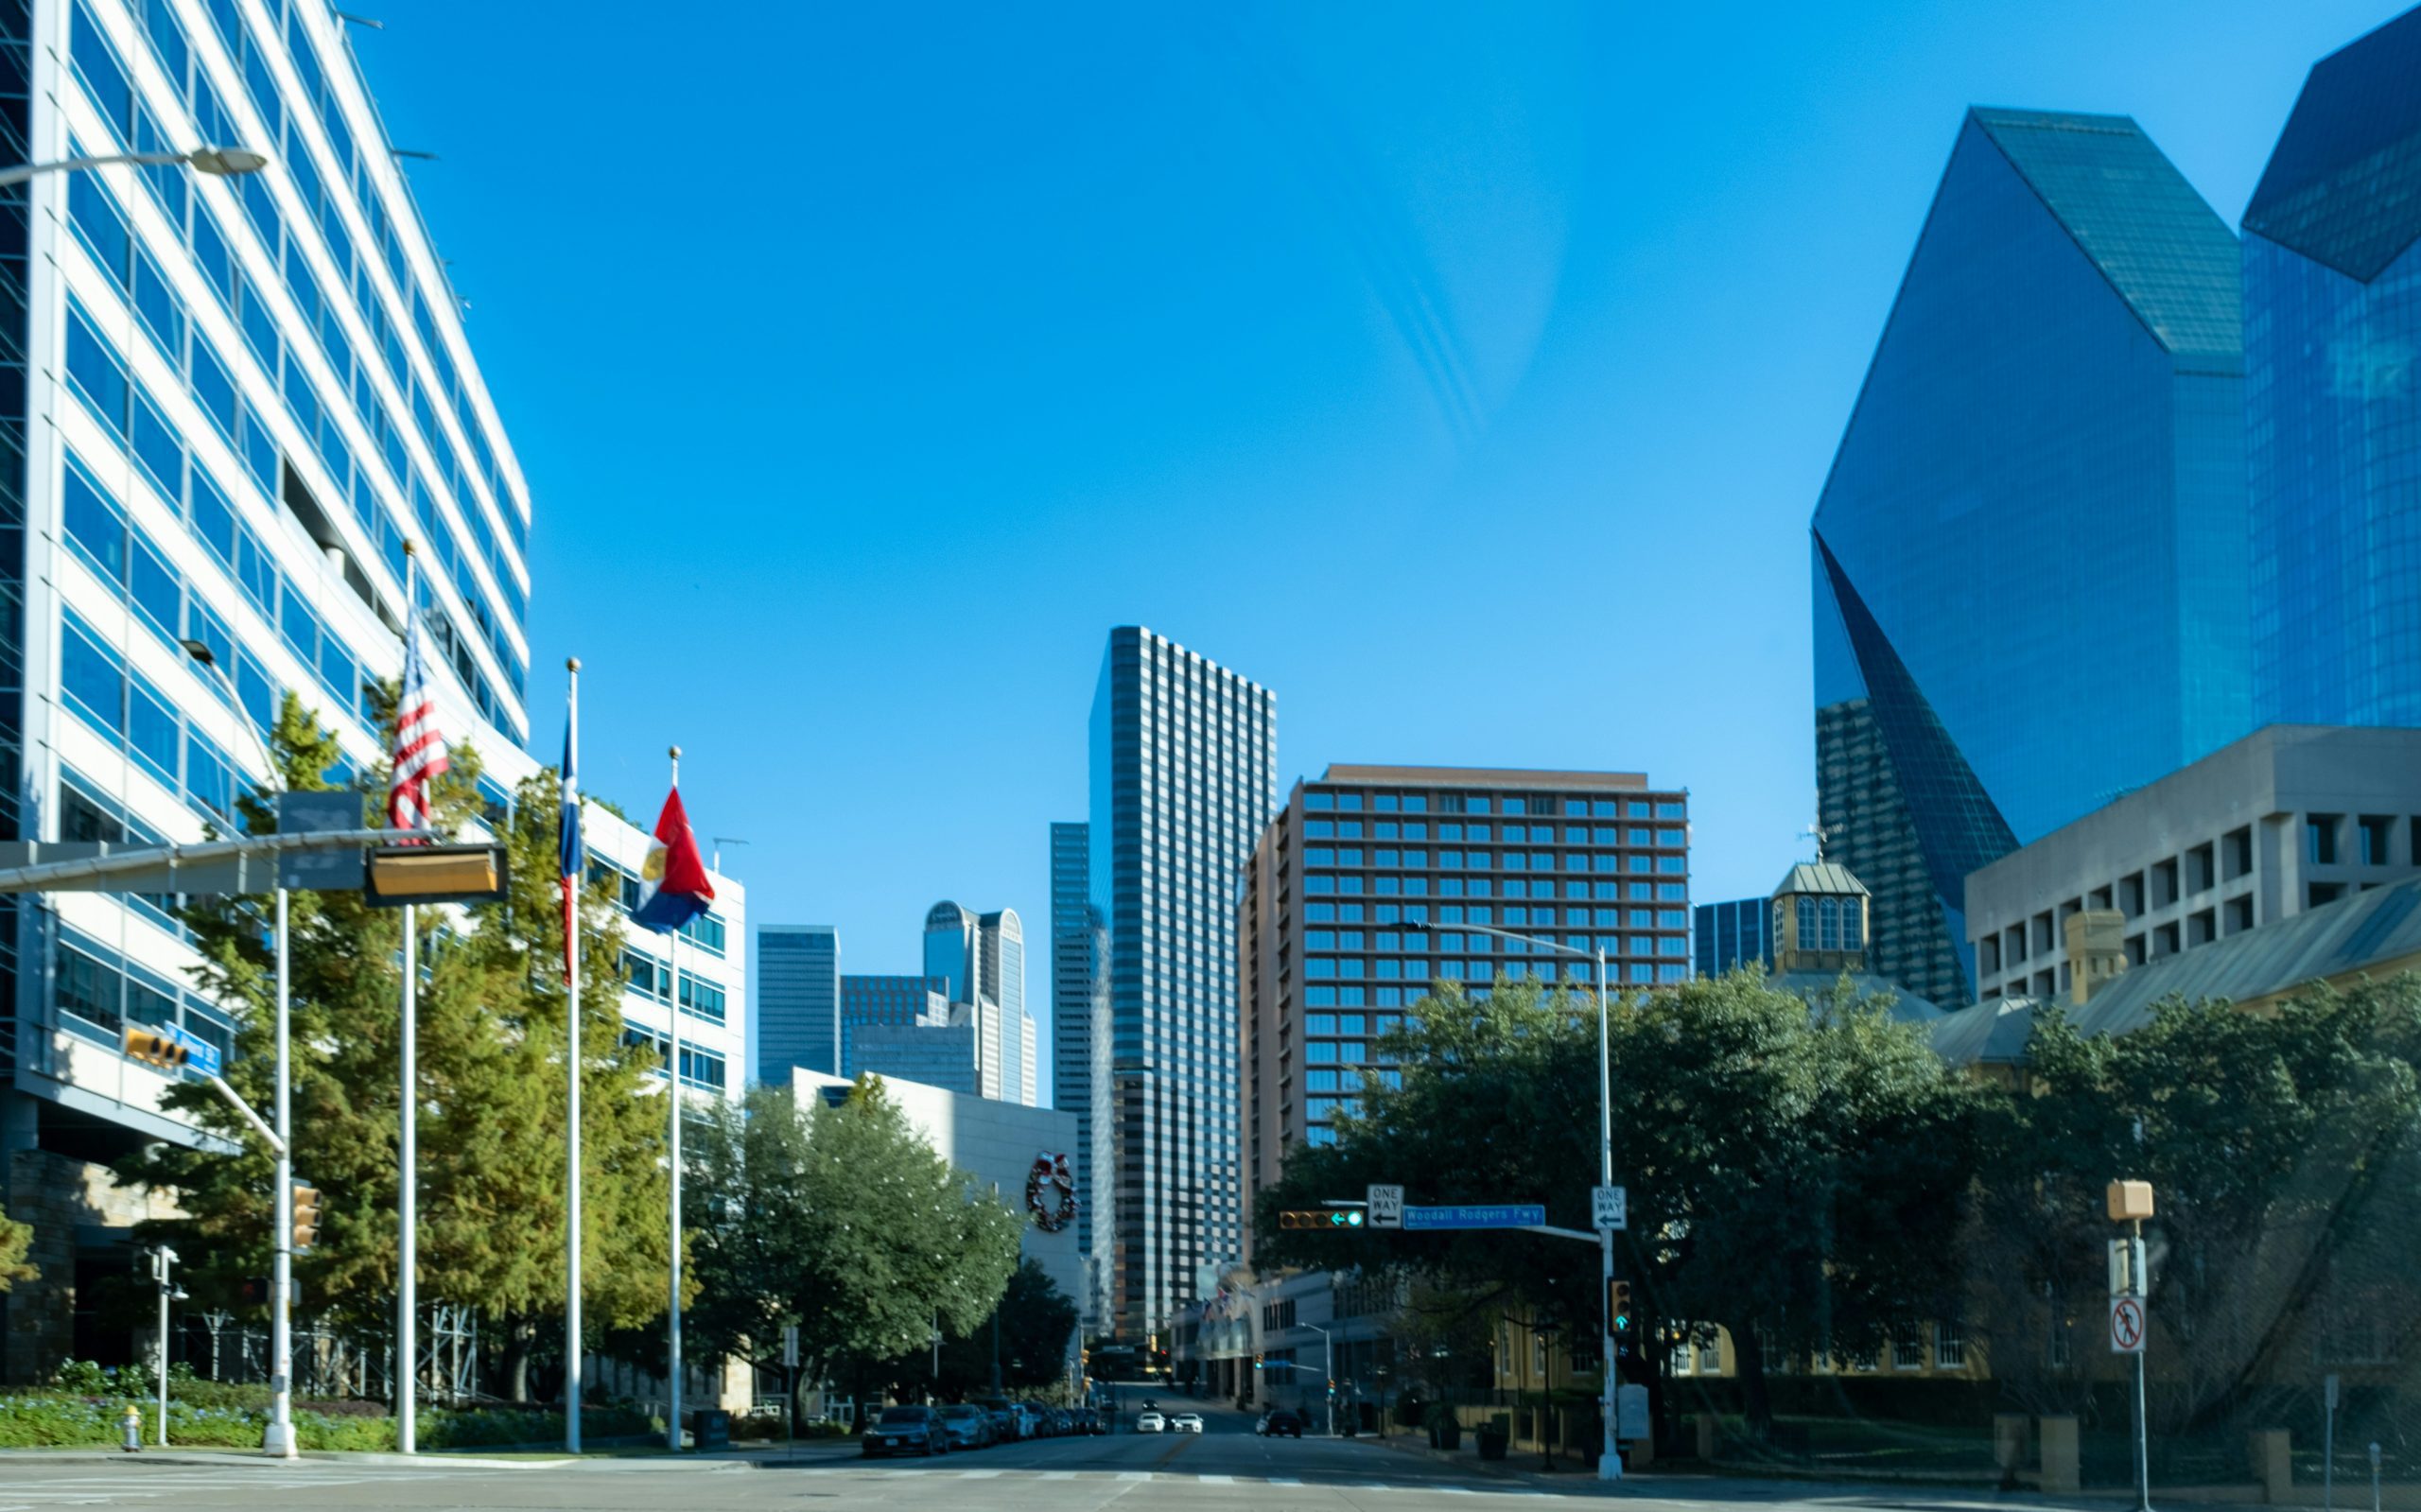 Take Your Dallas Business to the Next Level with SEO